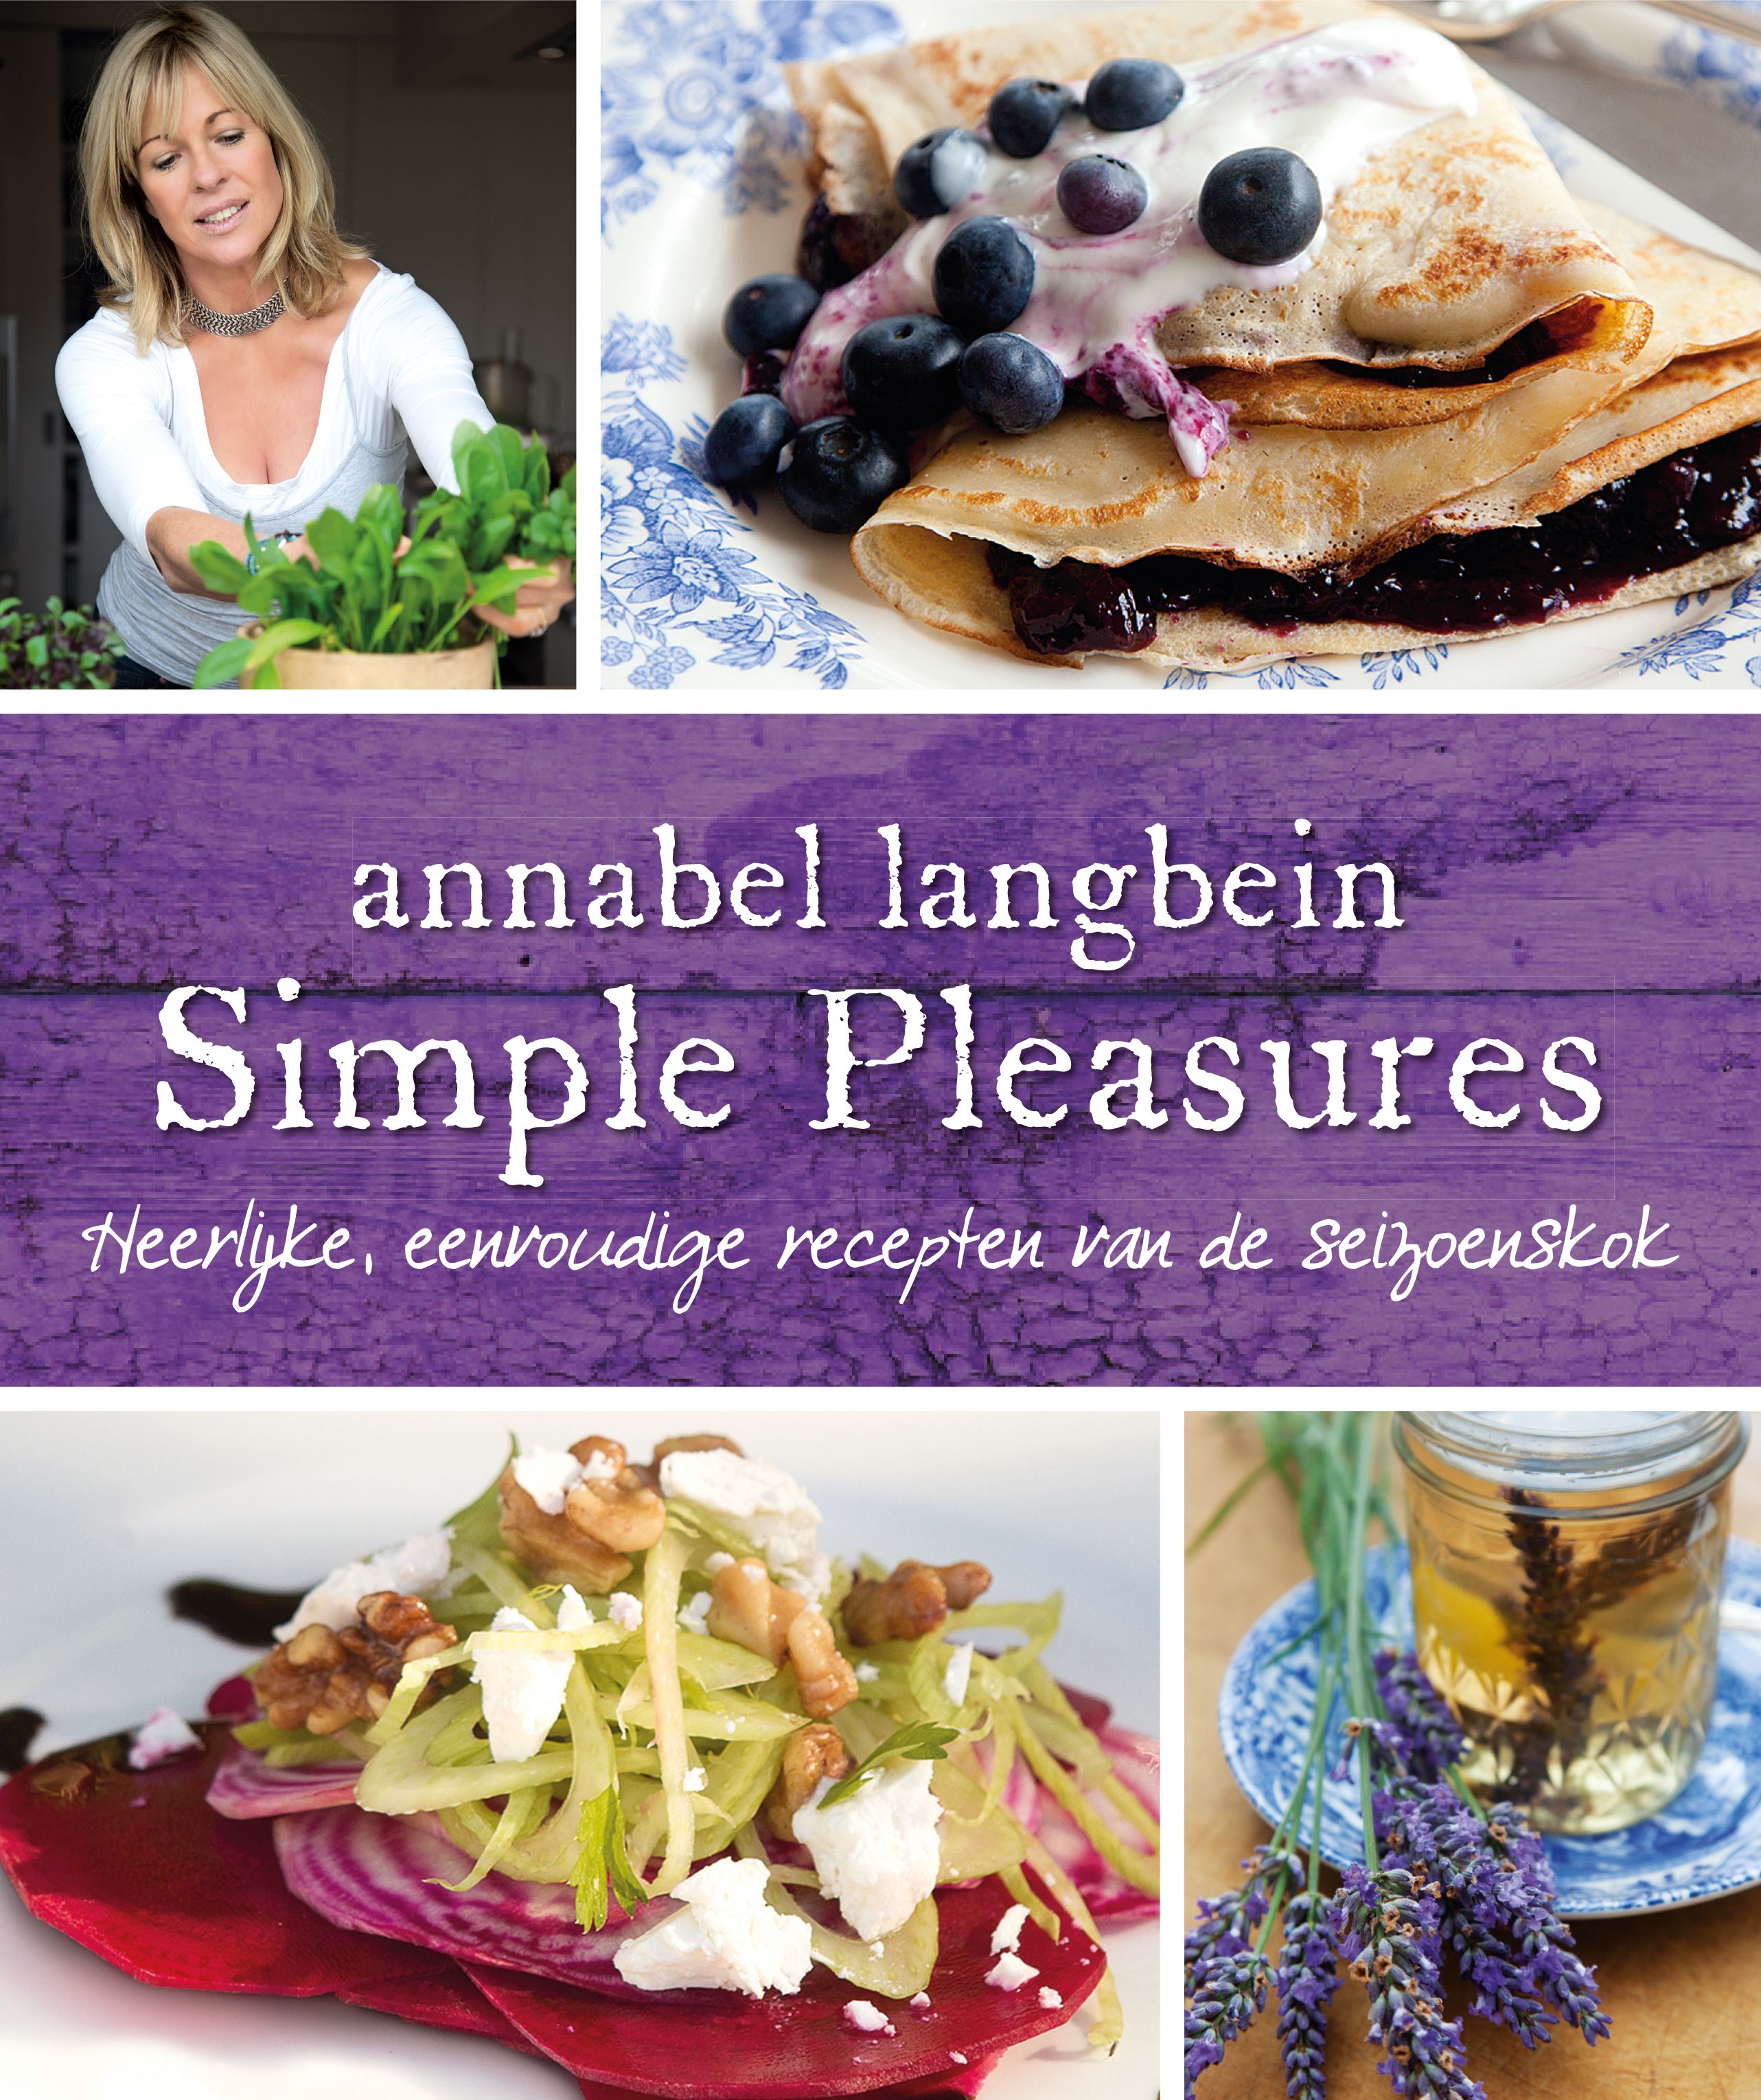 20130328 Simple pleasures – Cover paperback.indd